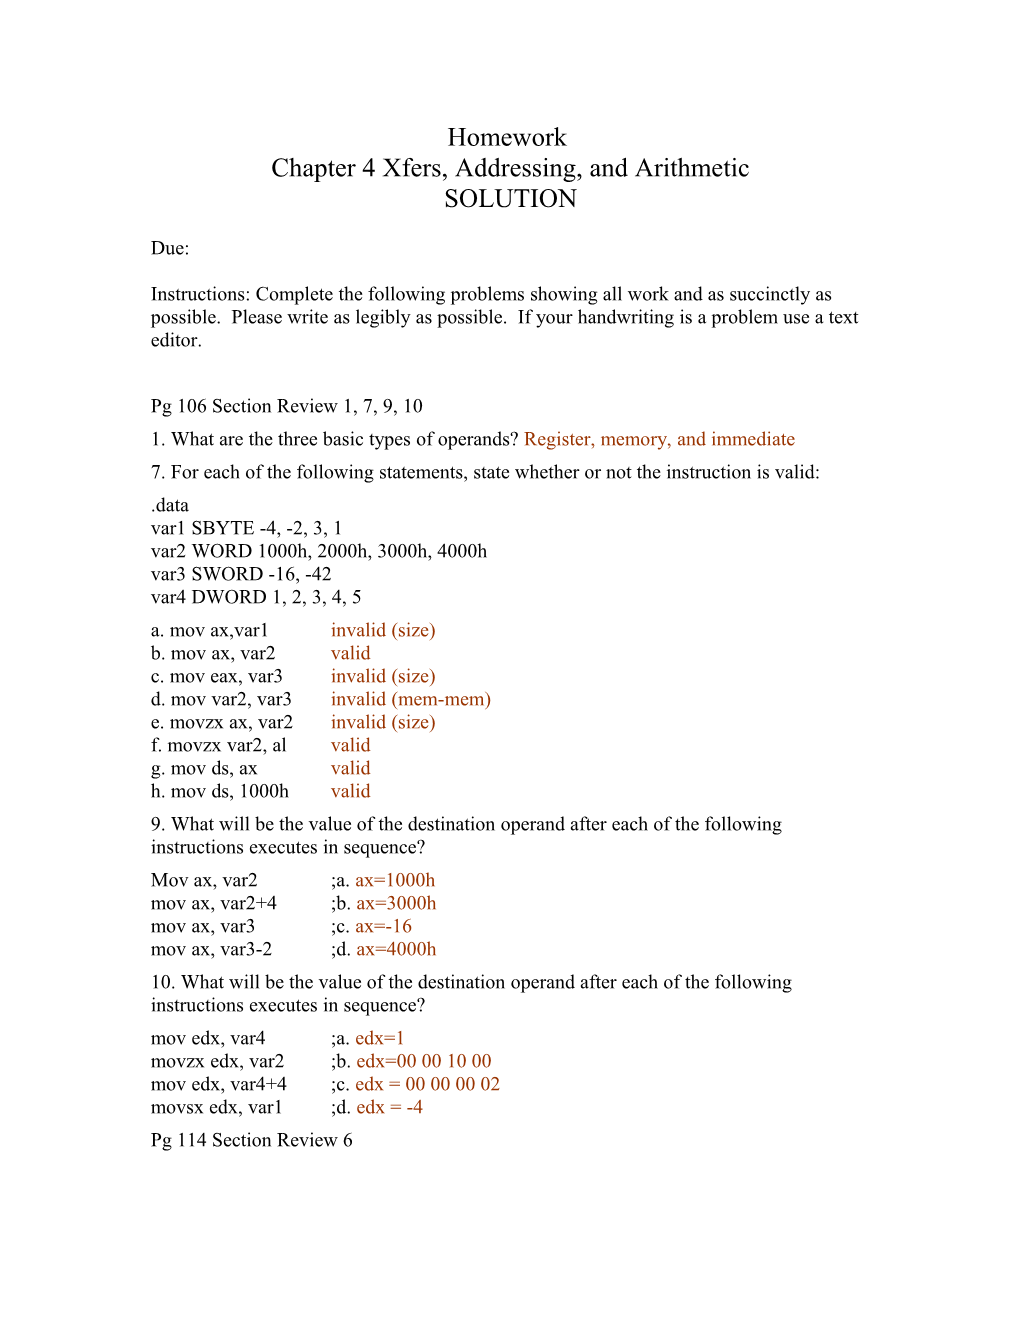 Chapter 4Xfers, Addressing, and Arithmetic